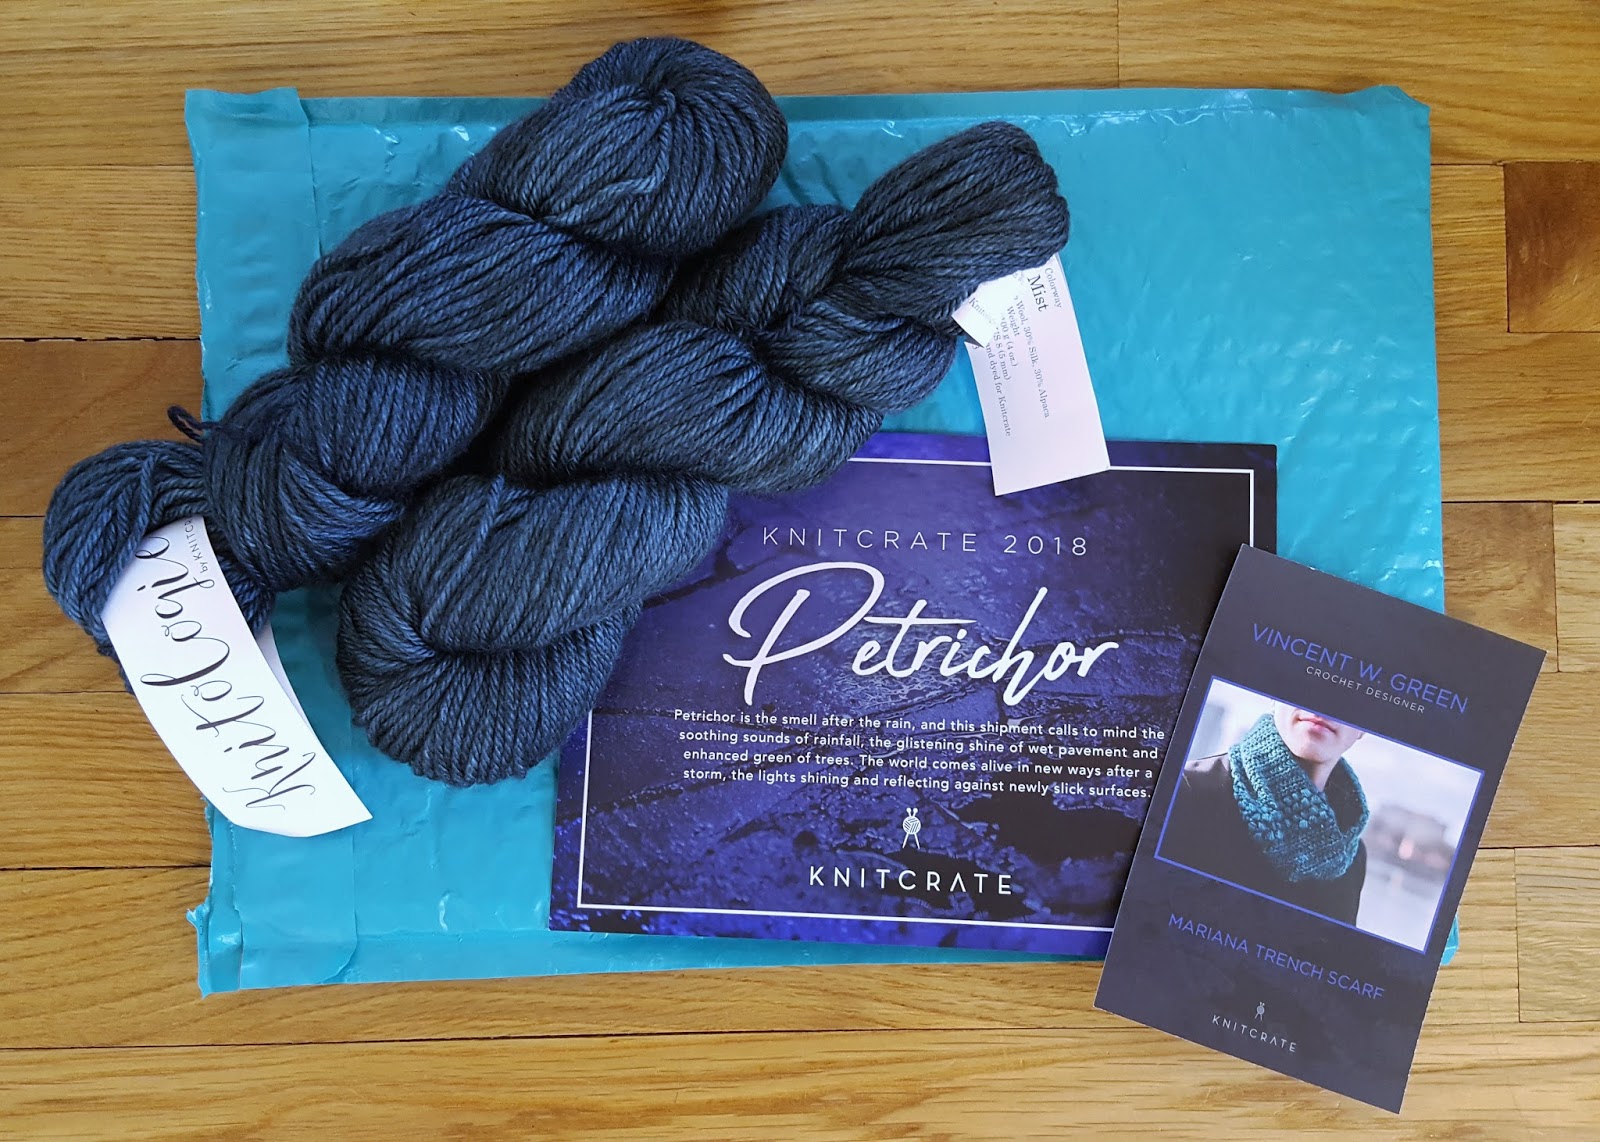 ChemKnits: NEW! KnitPicks Wholesale for Indie Dyers + Build Your Own Value  Packs for Retail Customers